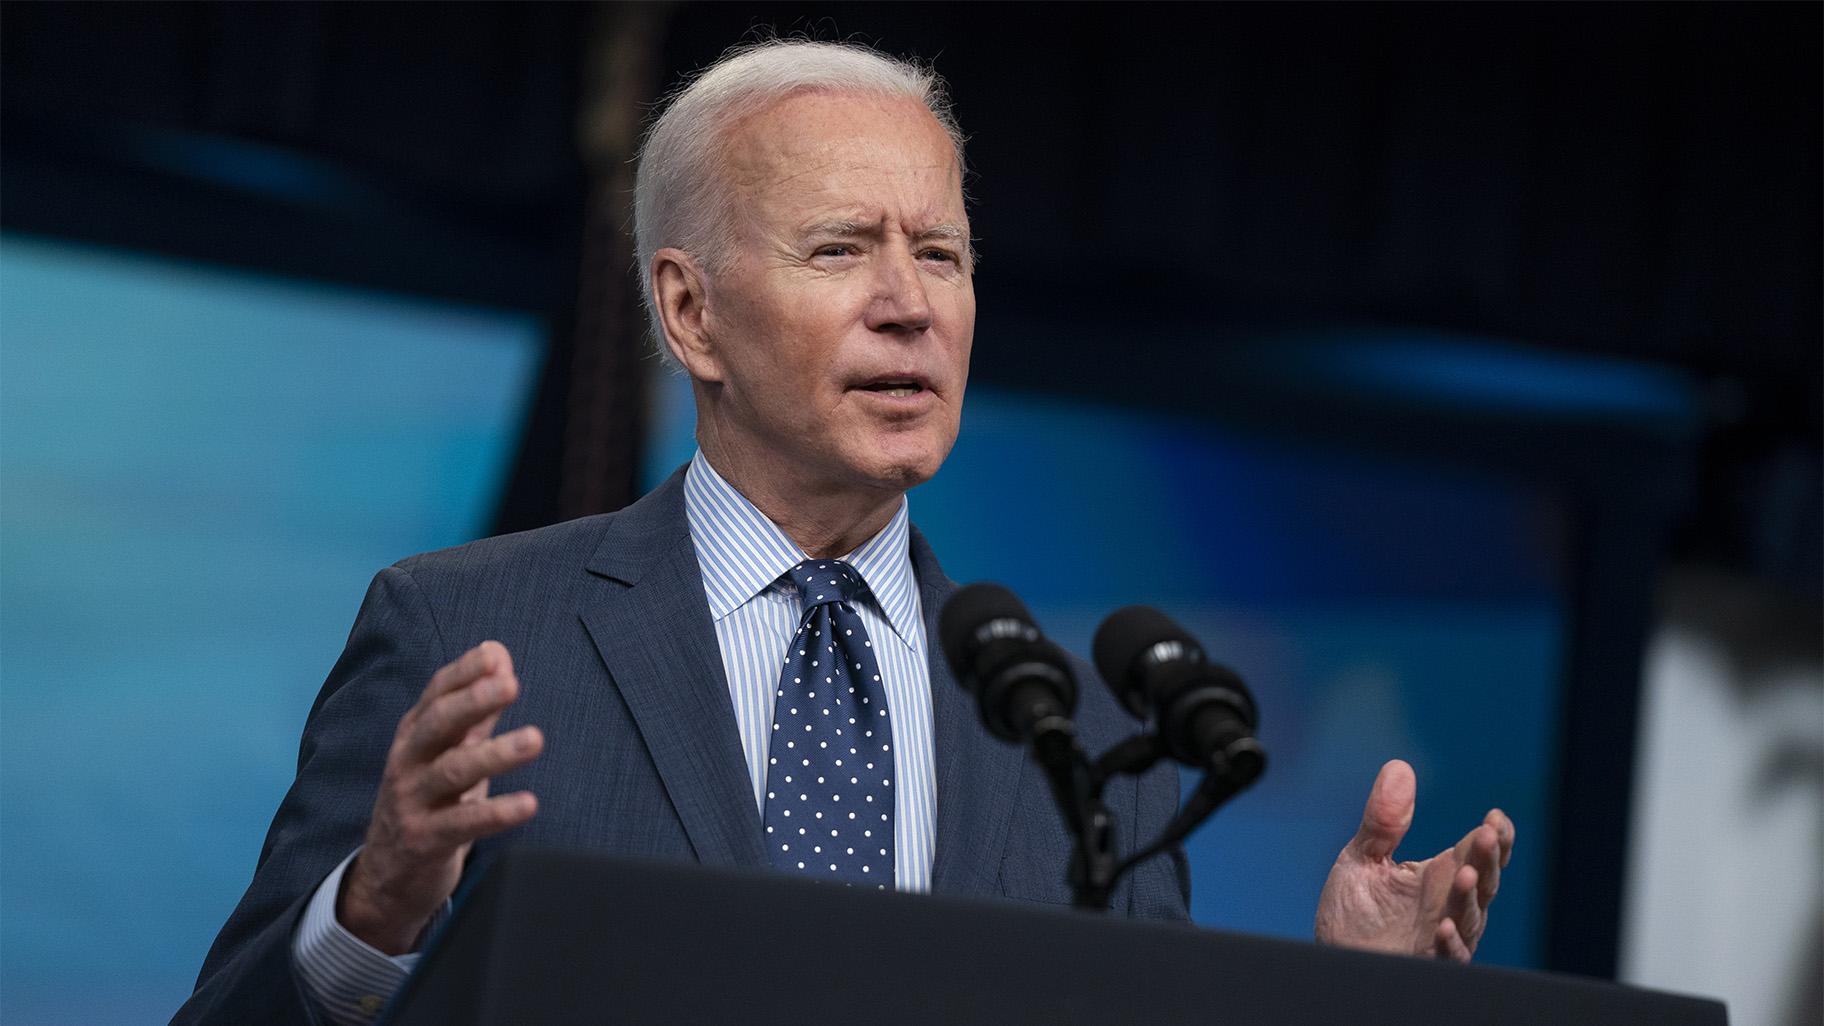 President Joe Biden speaks about the COVID-19 vaccination program, in the South Court Auditorium on the White House campus, Wednesday, June 2, 2021, in Washington. (AP Photo / Evan Vucci)